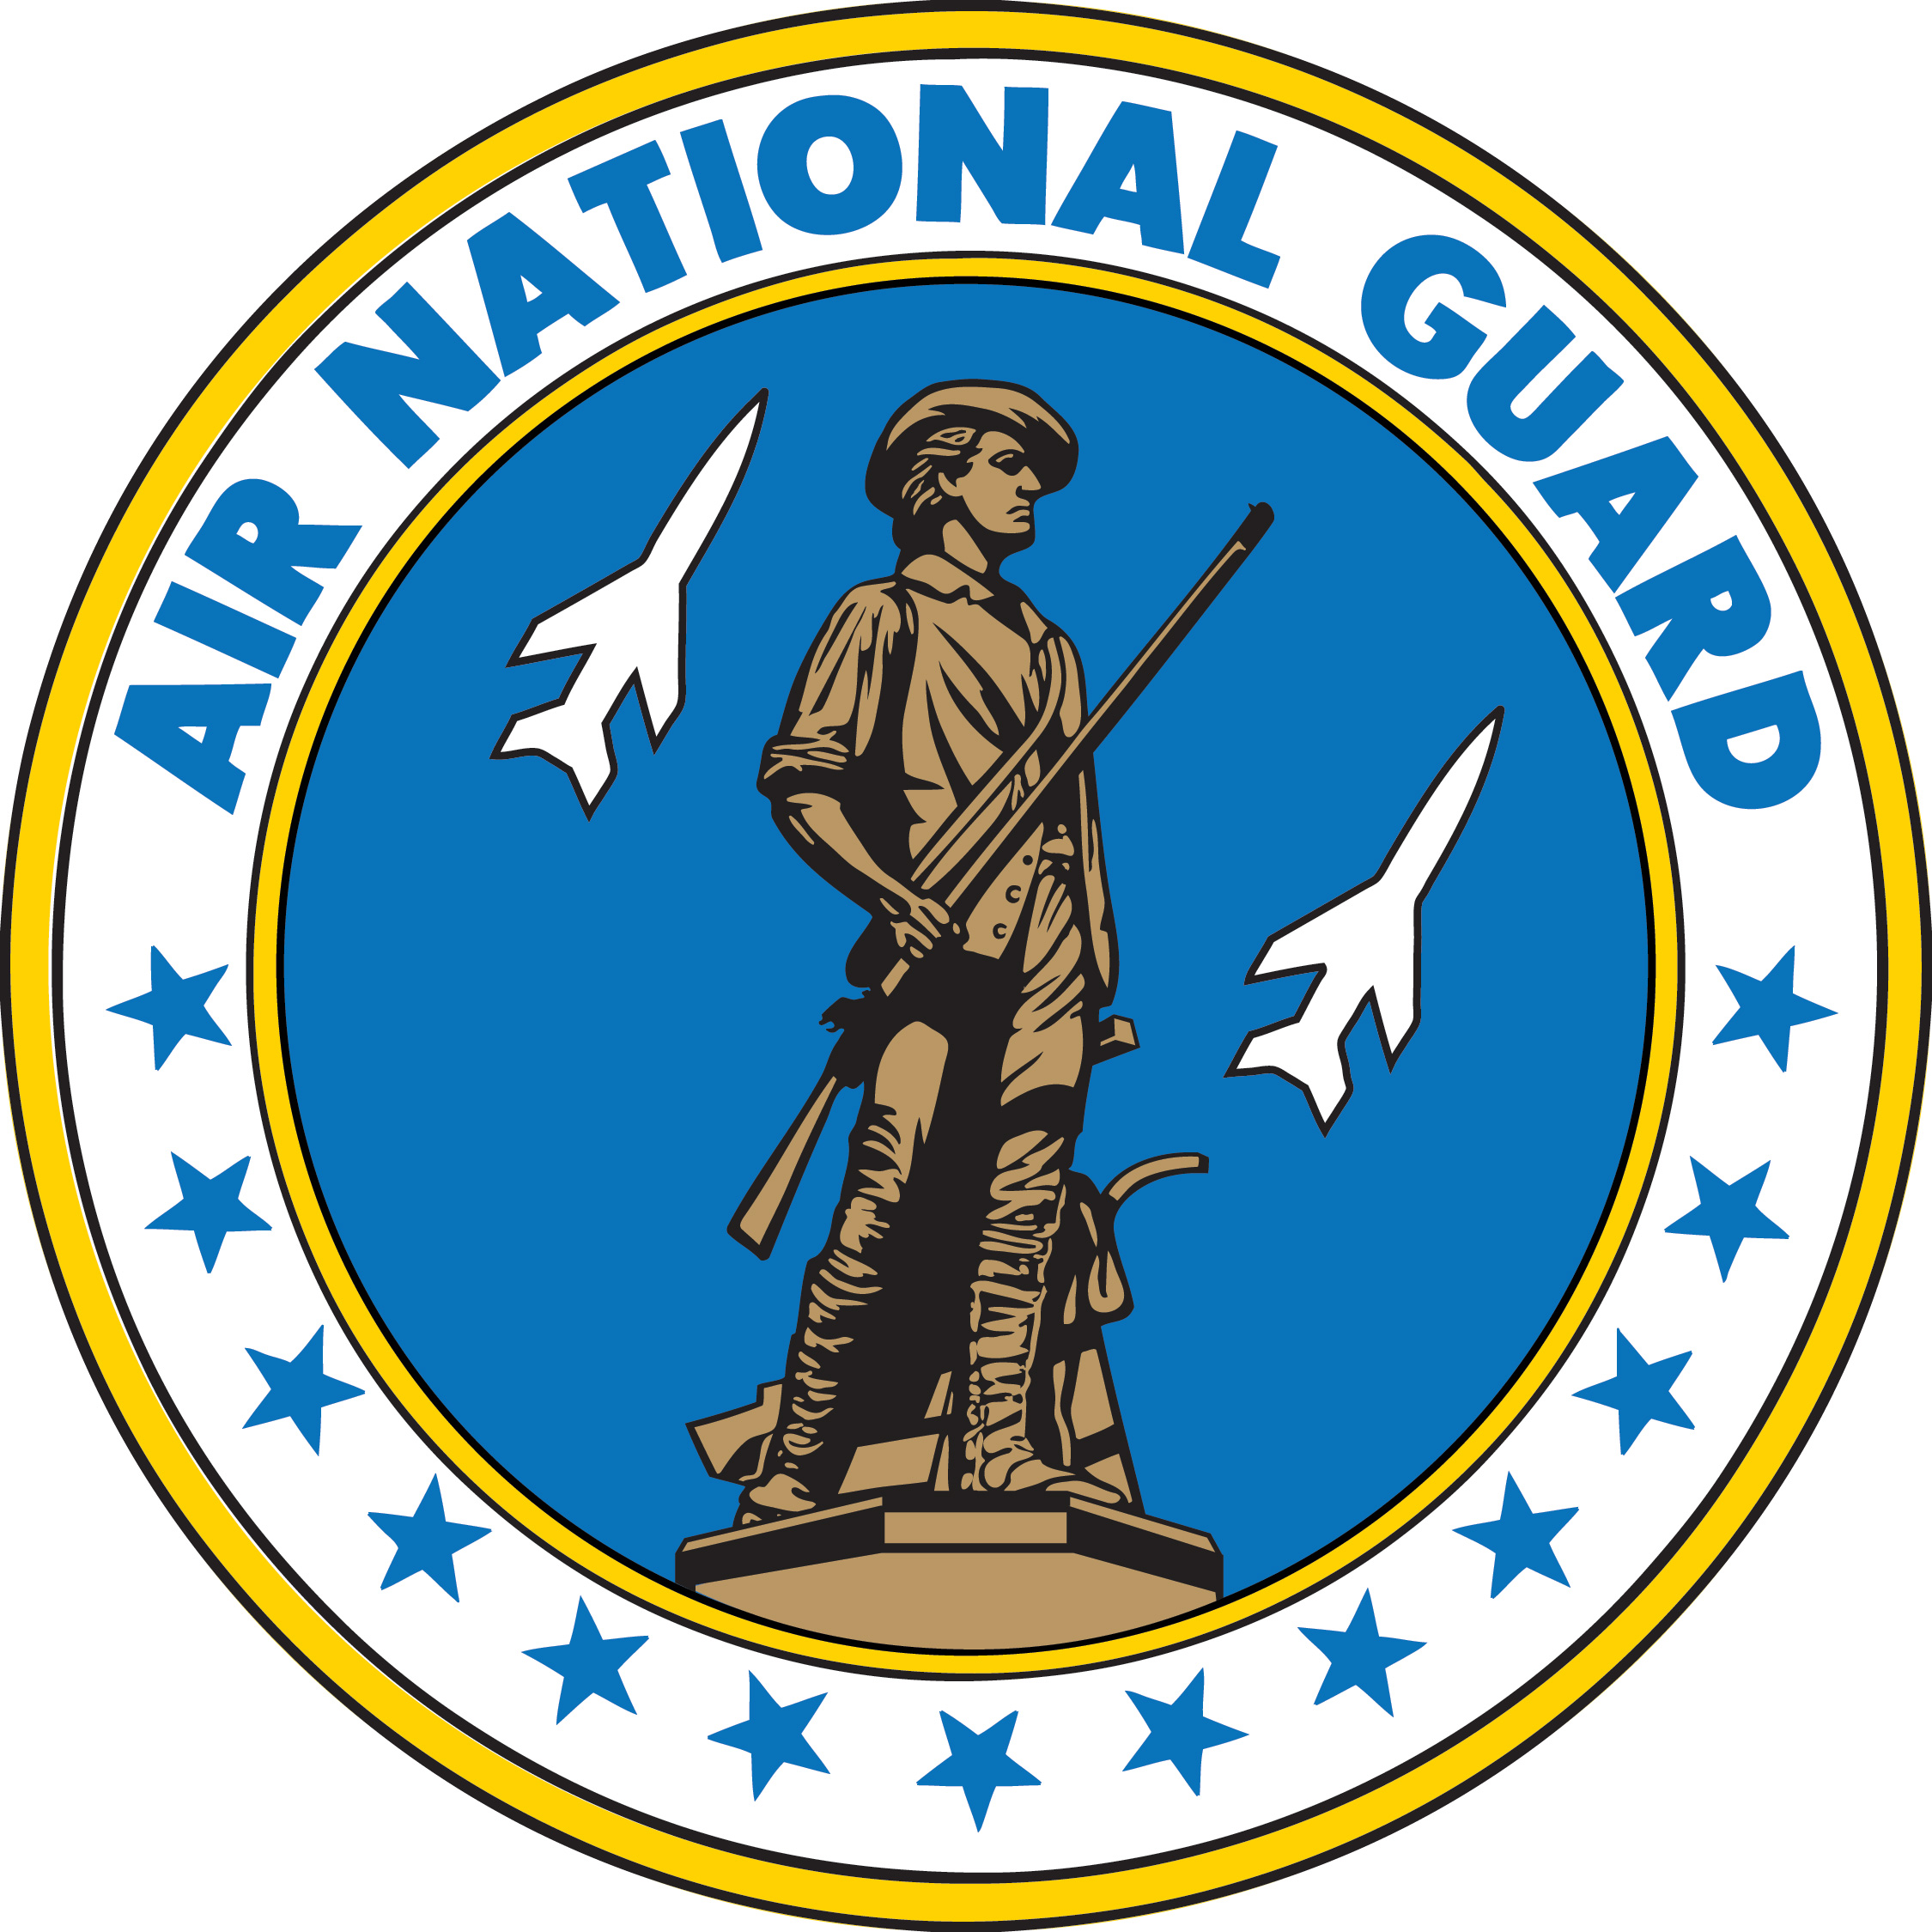 US Air Force National Guard Web Site